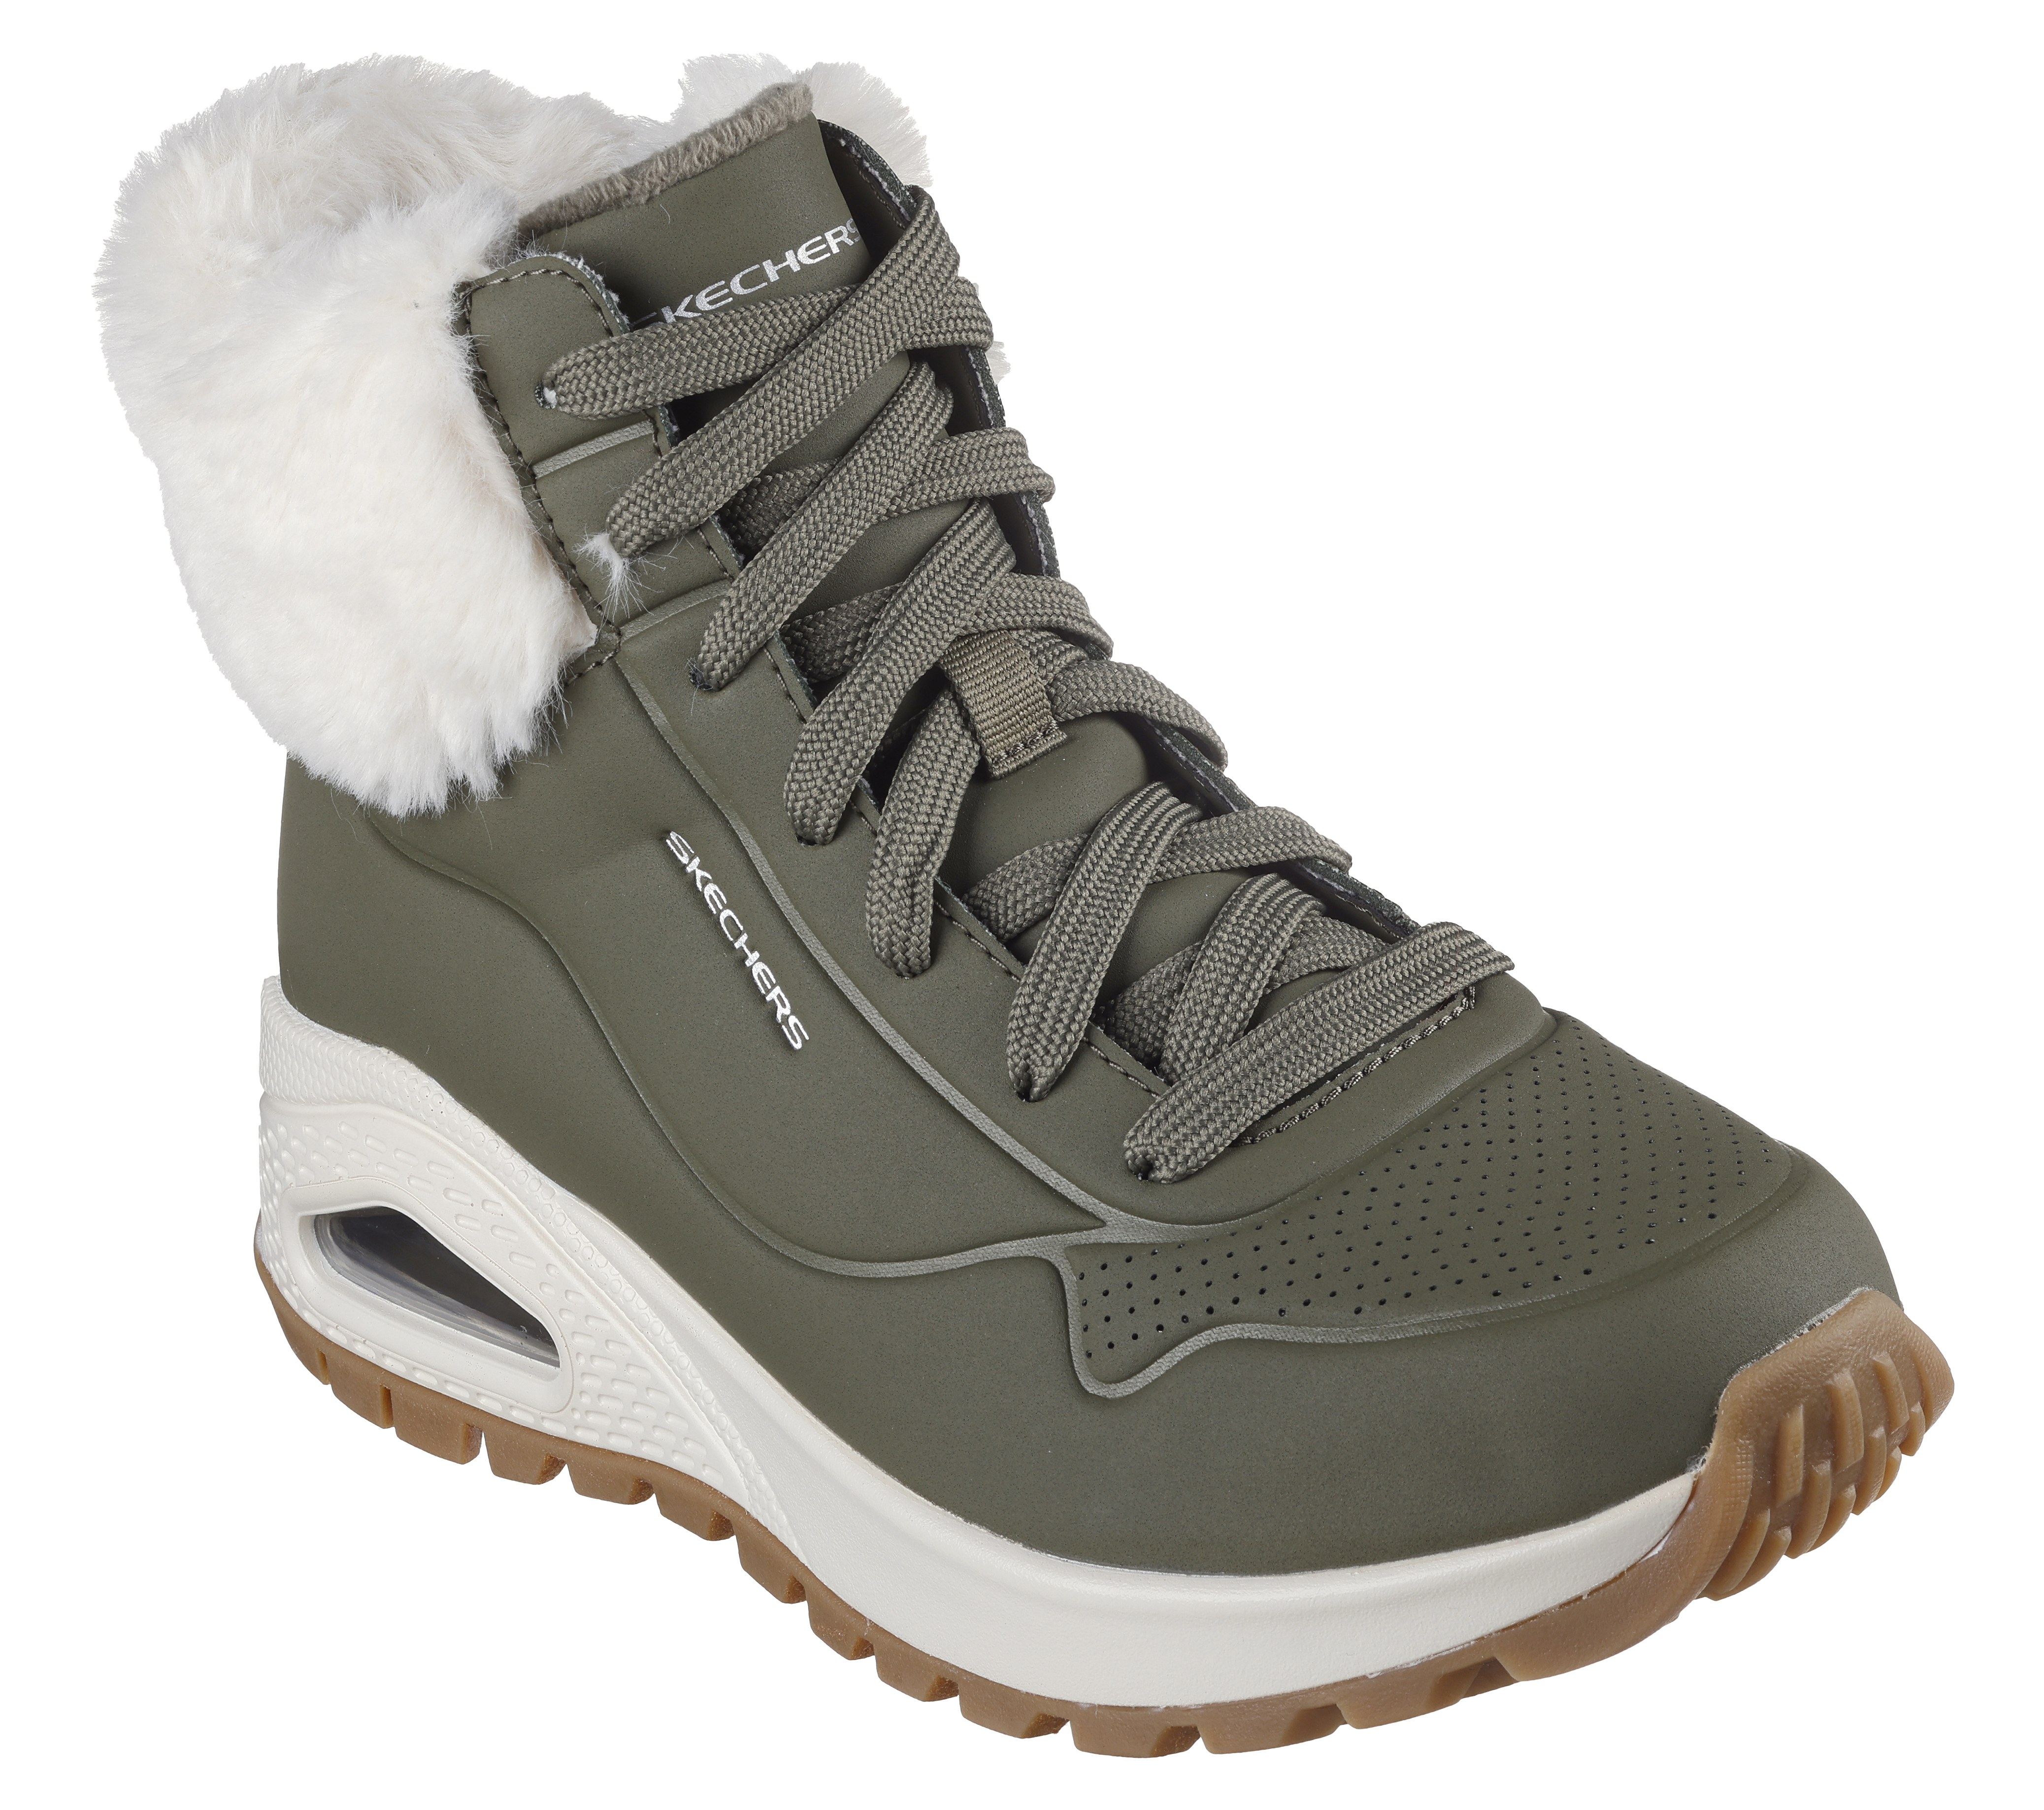 Skechers Art. UNO RUGGED - FALL AIR Warm lining in buy online